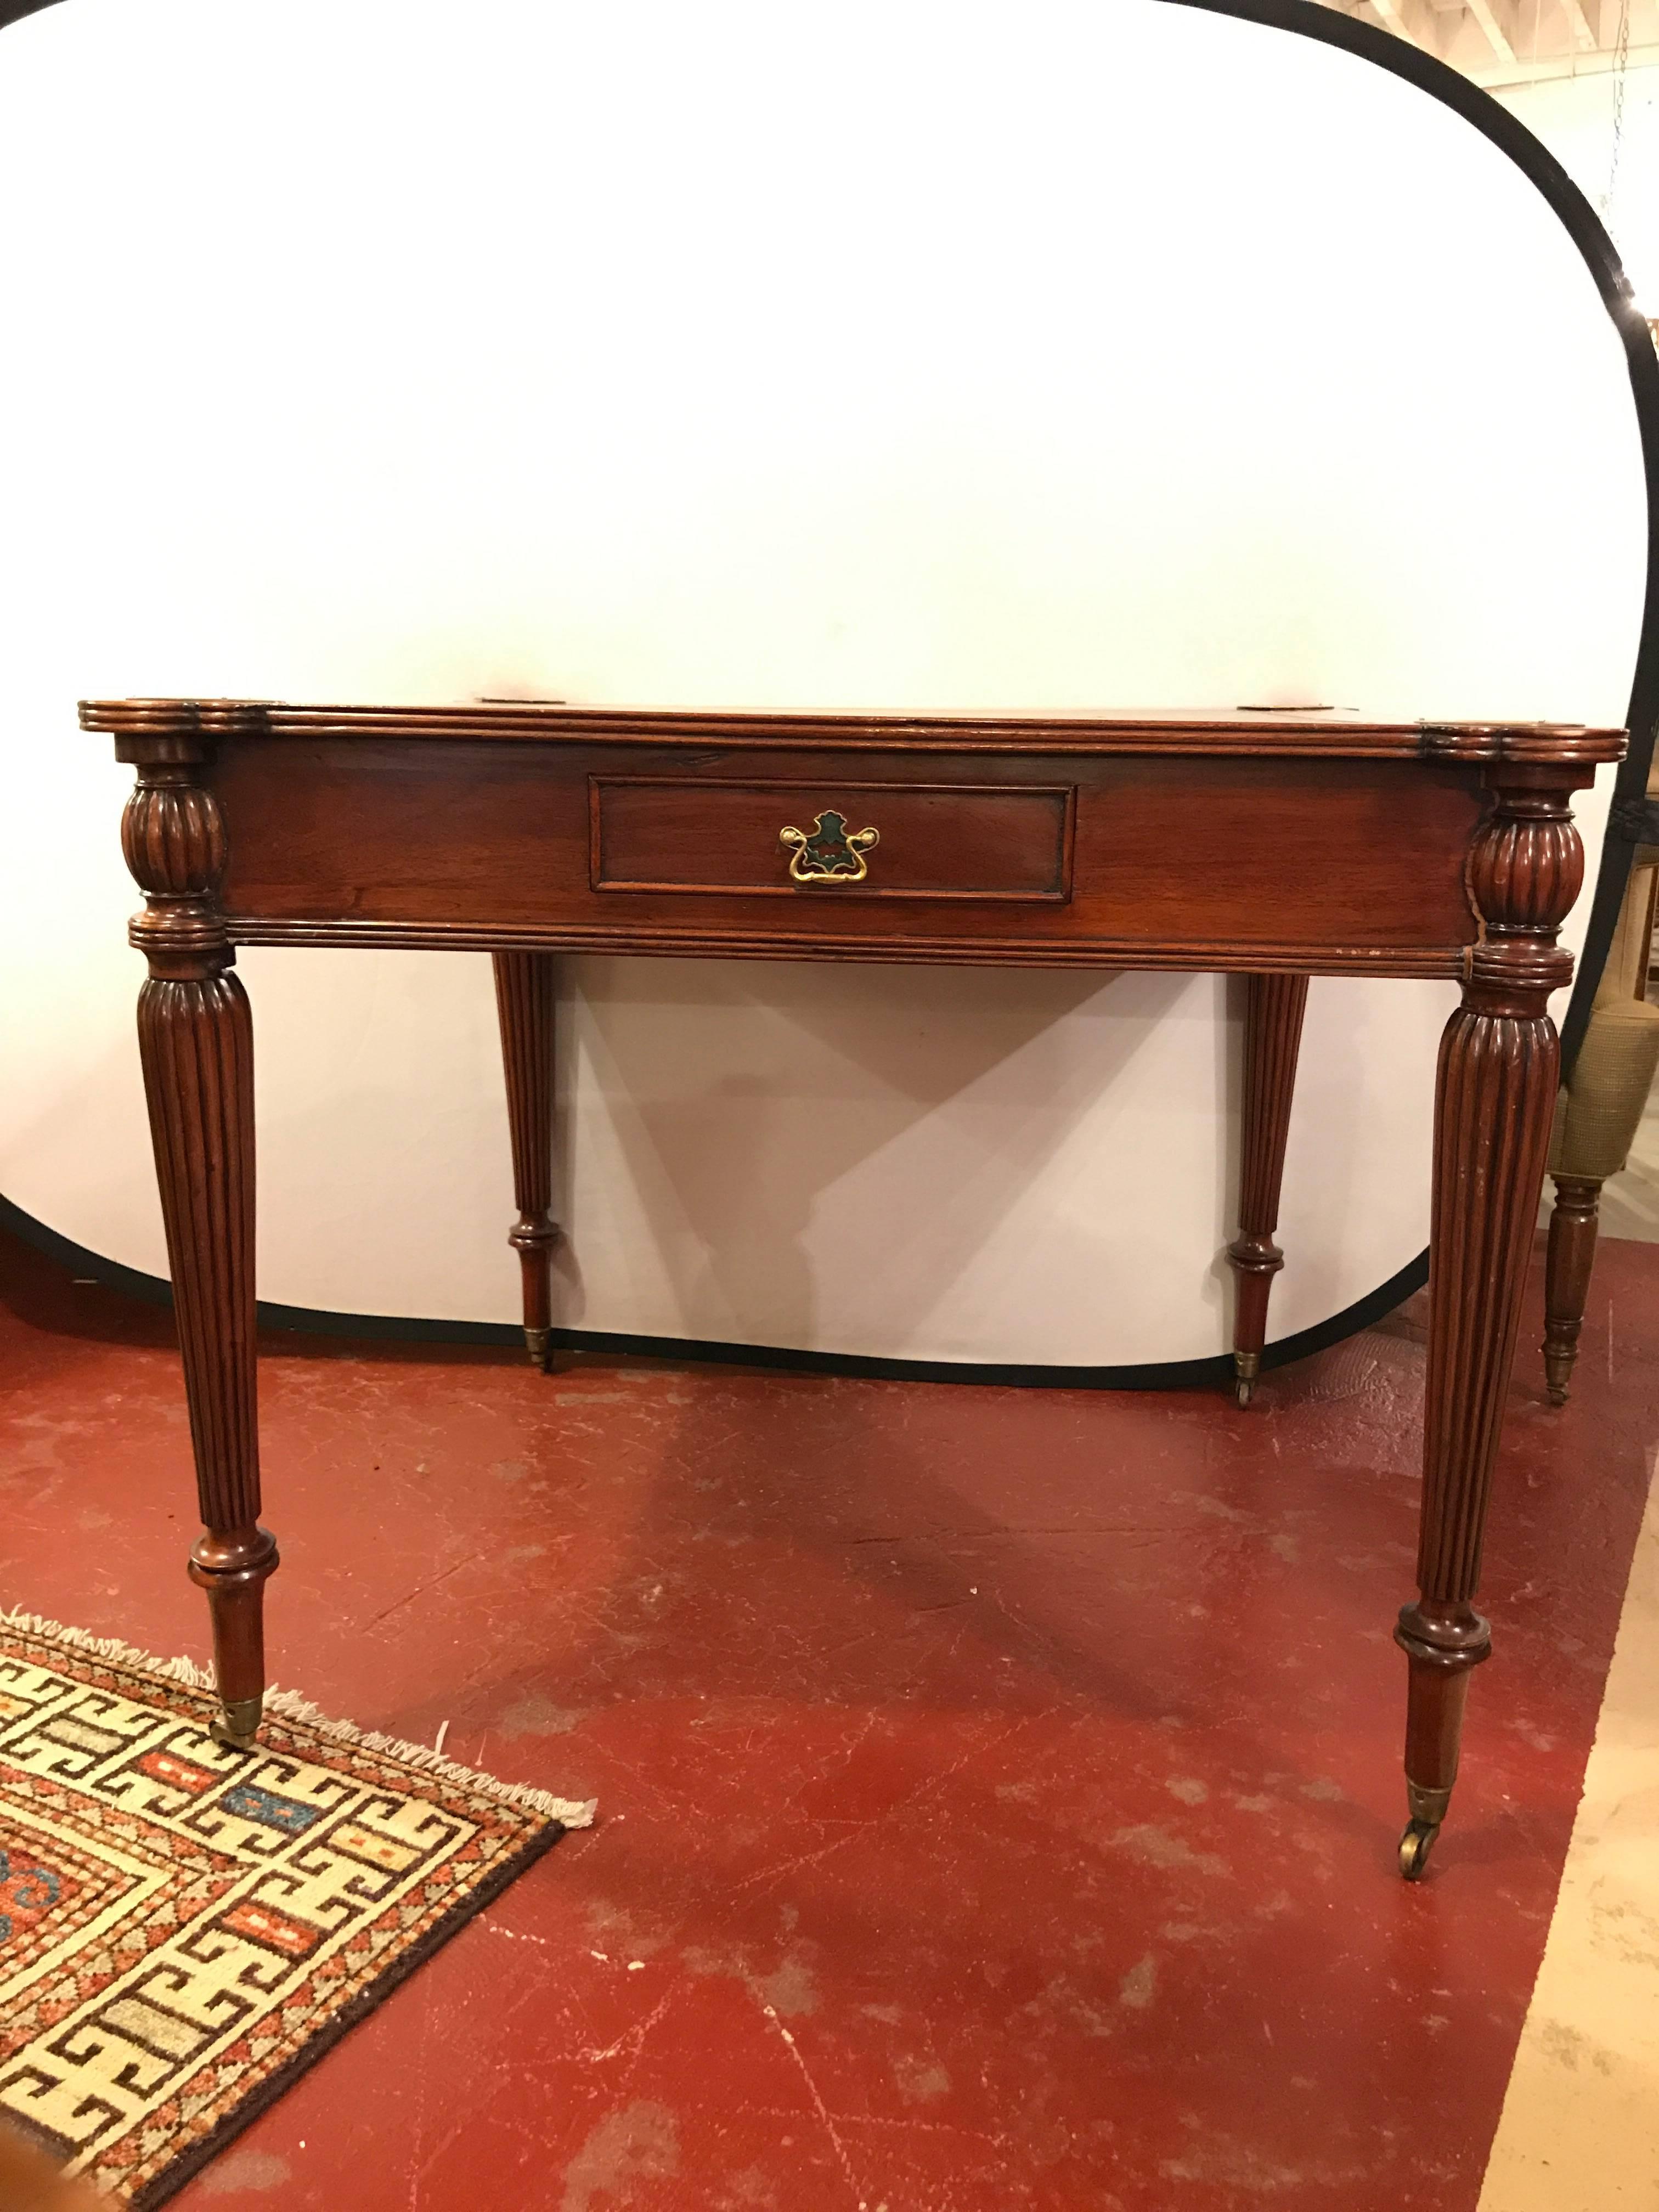 A leather top mahogany card table in the manner of Maitland Smith. This fine custom quality card table has a tooled leather top with gilt design flanked by four brass coin trays. The apron having four drawers to store each players personal items.